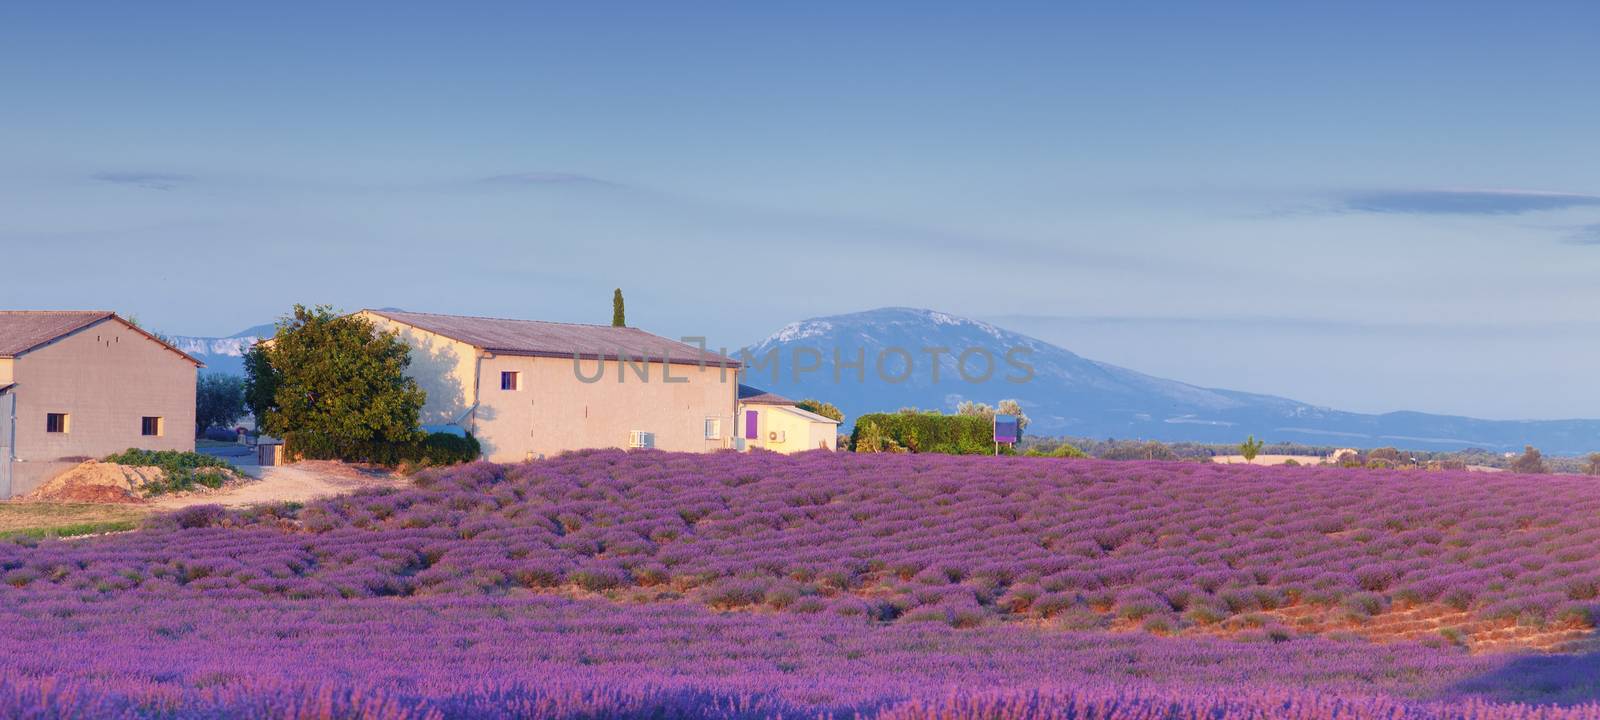 Lavander farm  in Valensole.Provence, France.